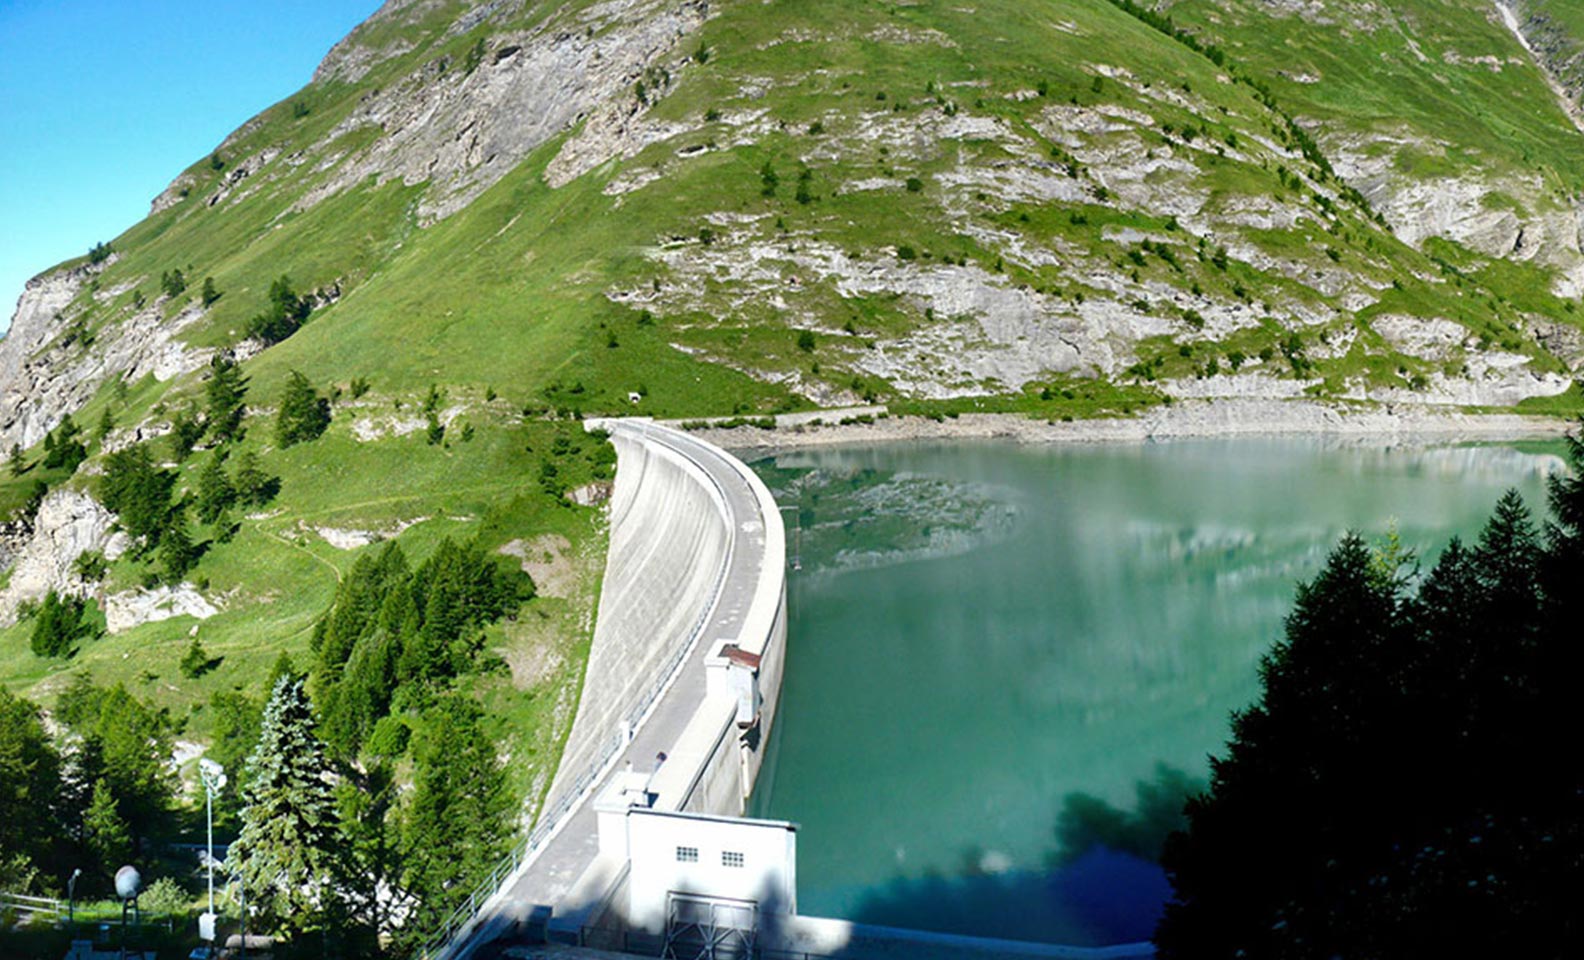 Dam and artificial lake in the mountains